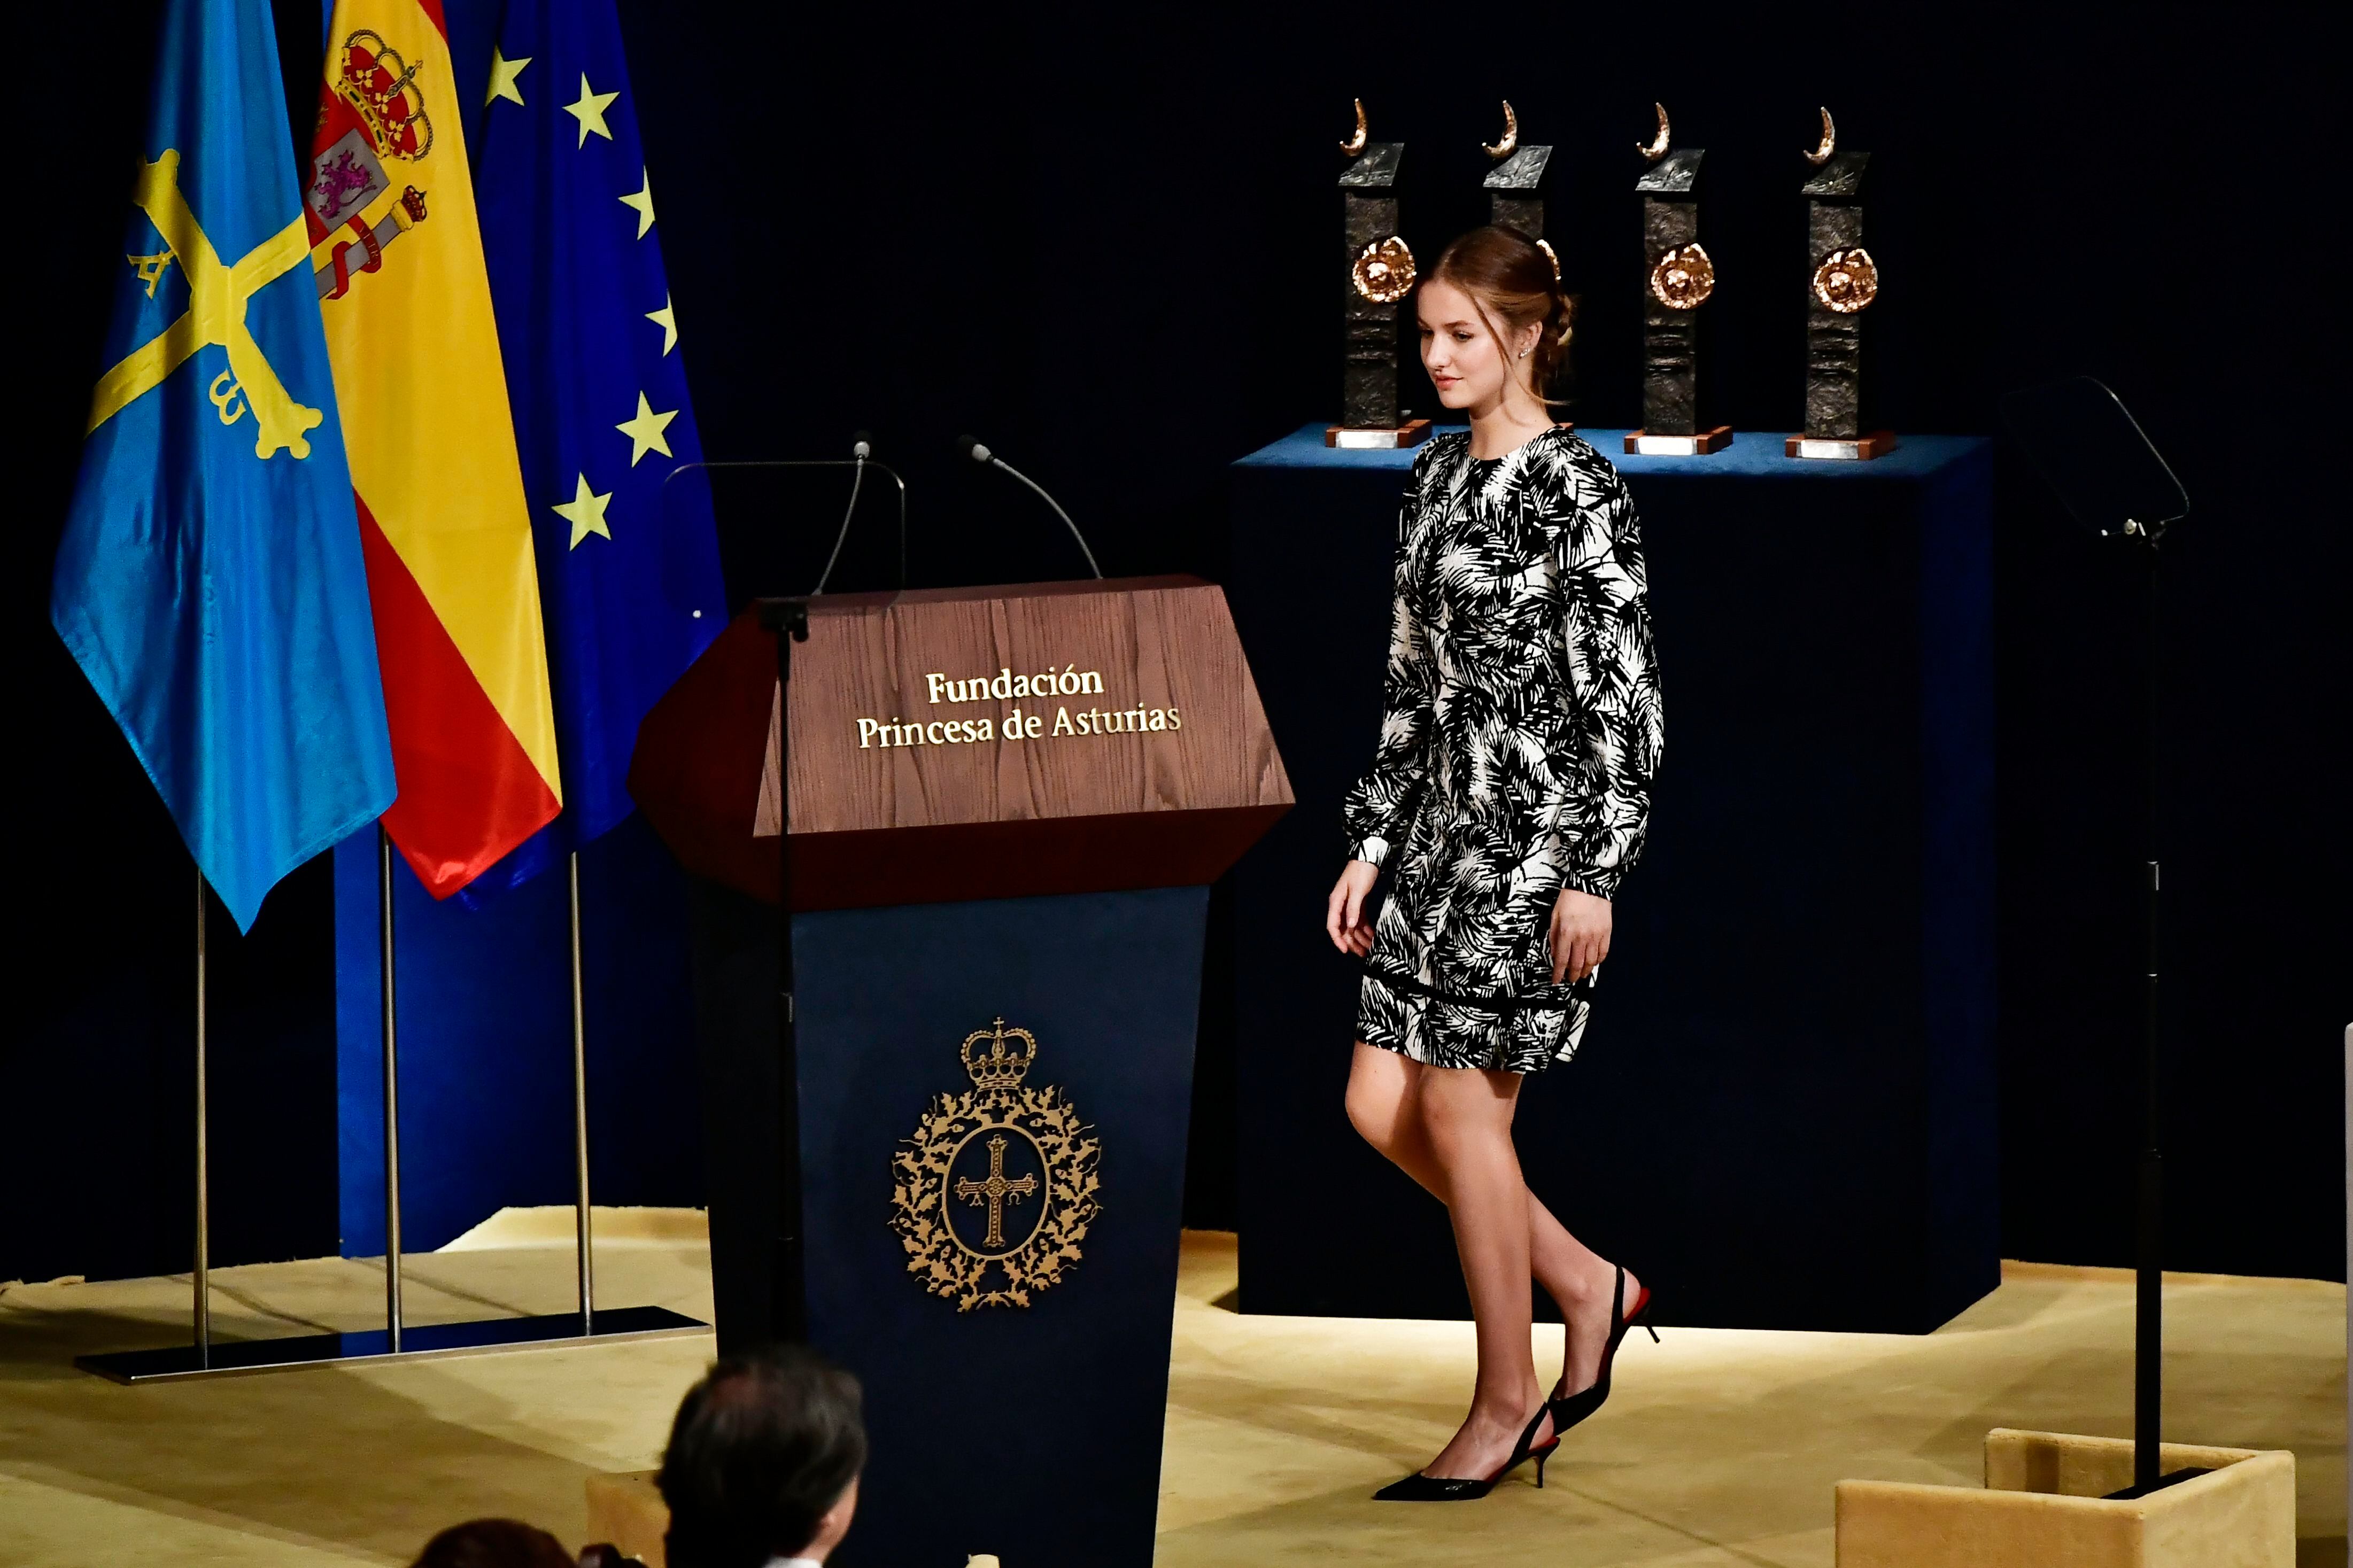 Rights activist, archaeologist, architect honored in Spain